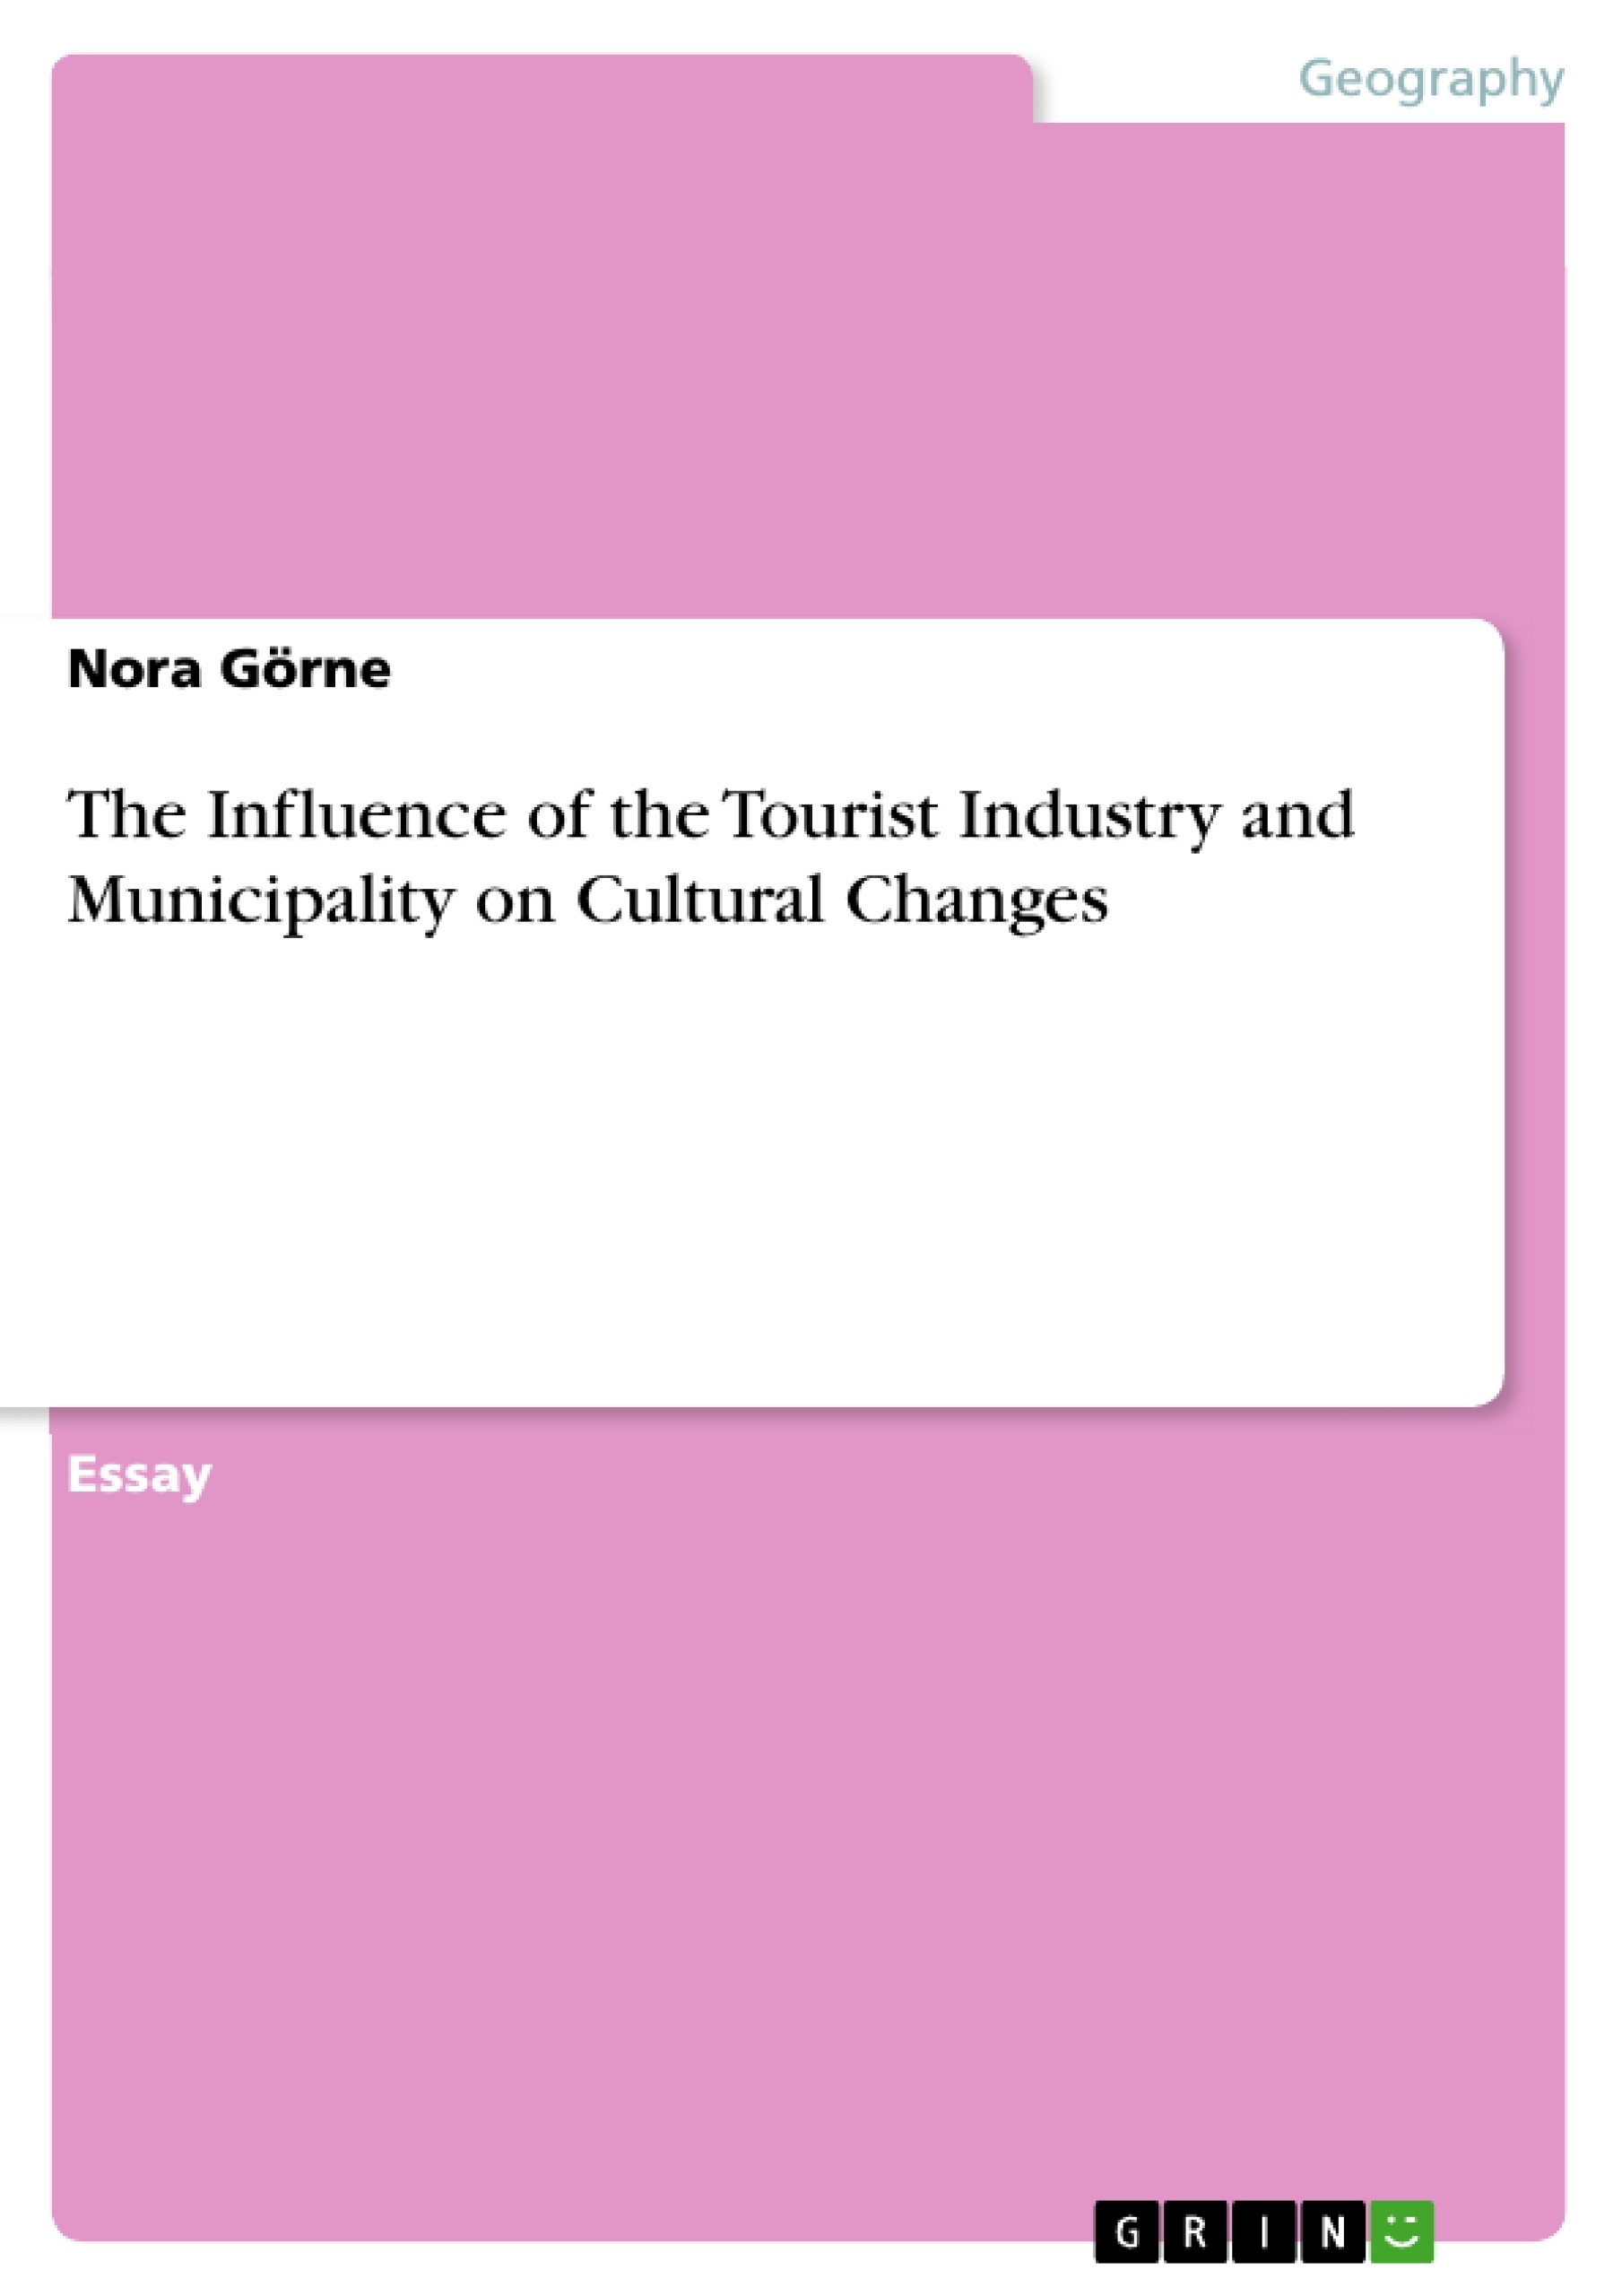 Titre: The Influence of the Tourist Industry and Municipality on Cultural Changes